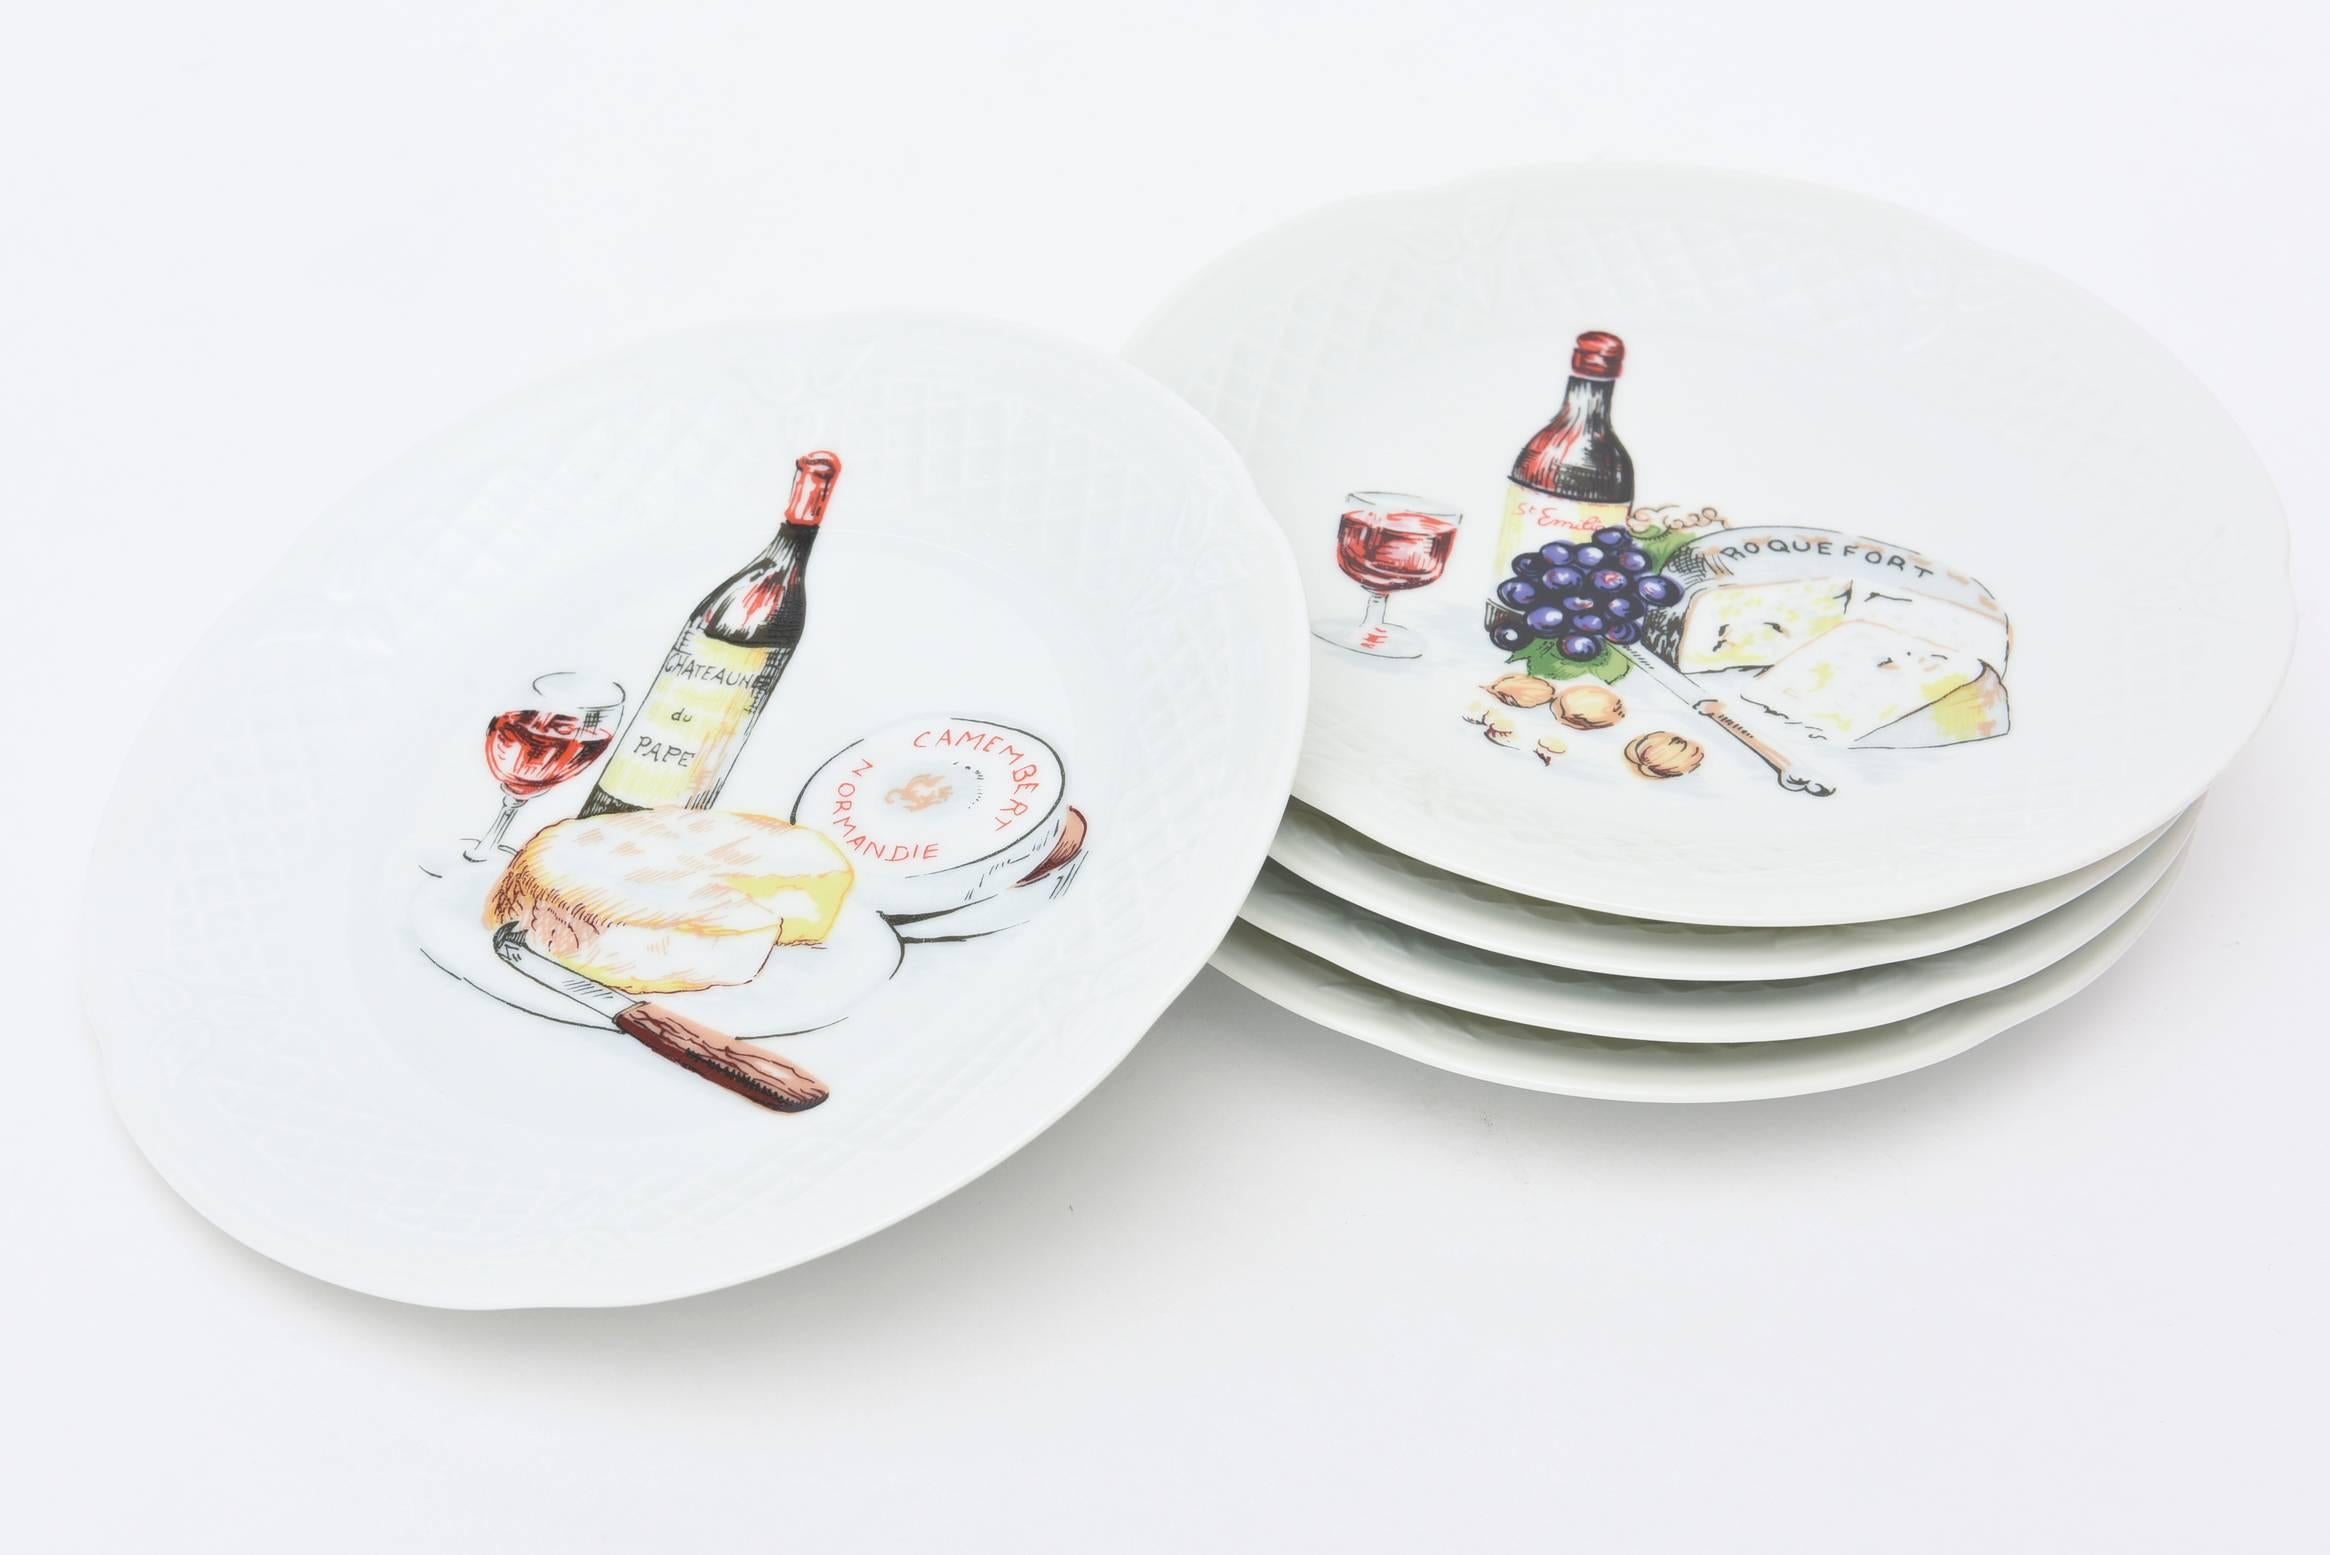 These artful and beautiful fine porcelain desert/cheese plates have beautiful
colors. They are all different depictions of lobster, wine, grapes, cheese, meats and would make a beautiful hostess gift or add to your table setting or barware.
They